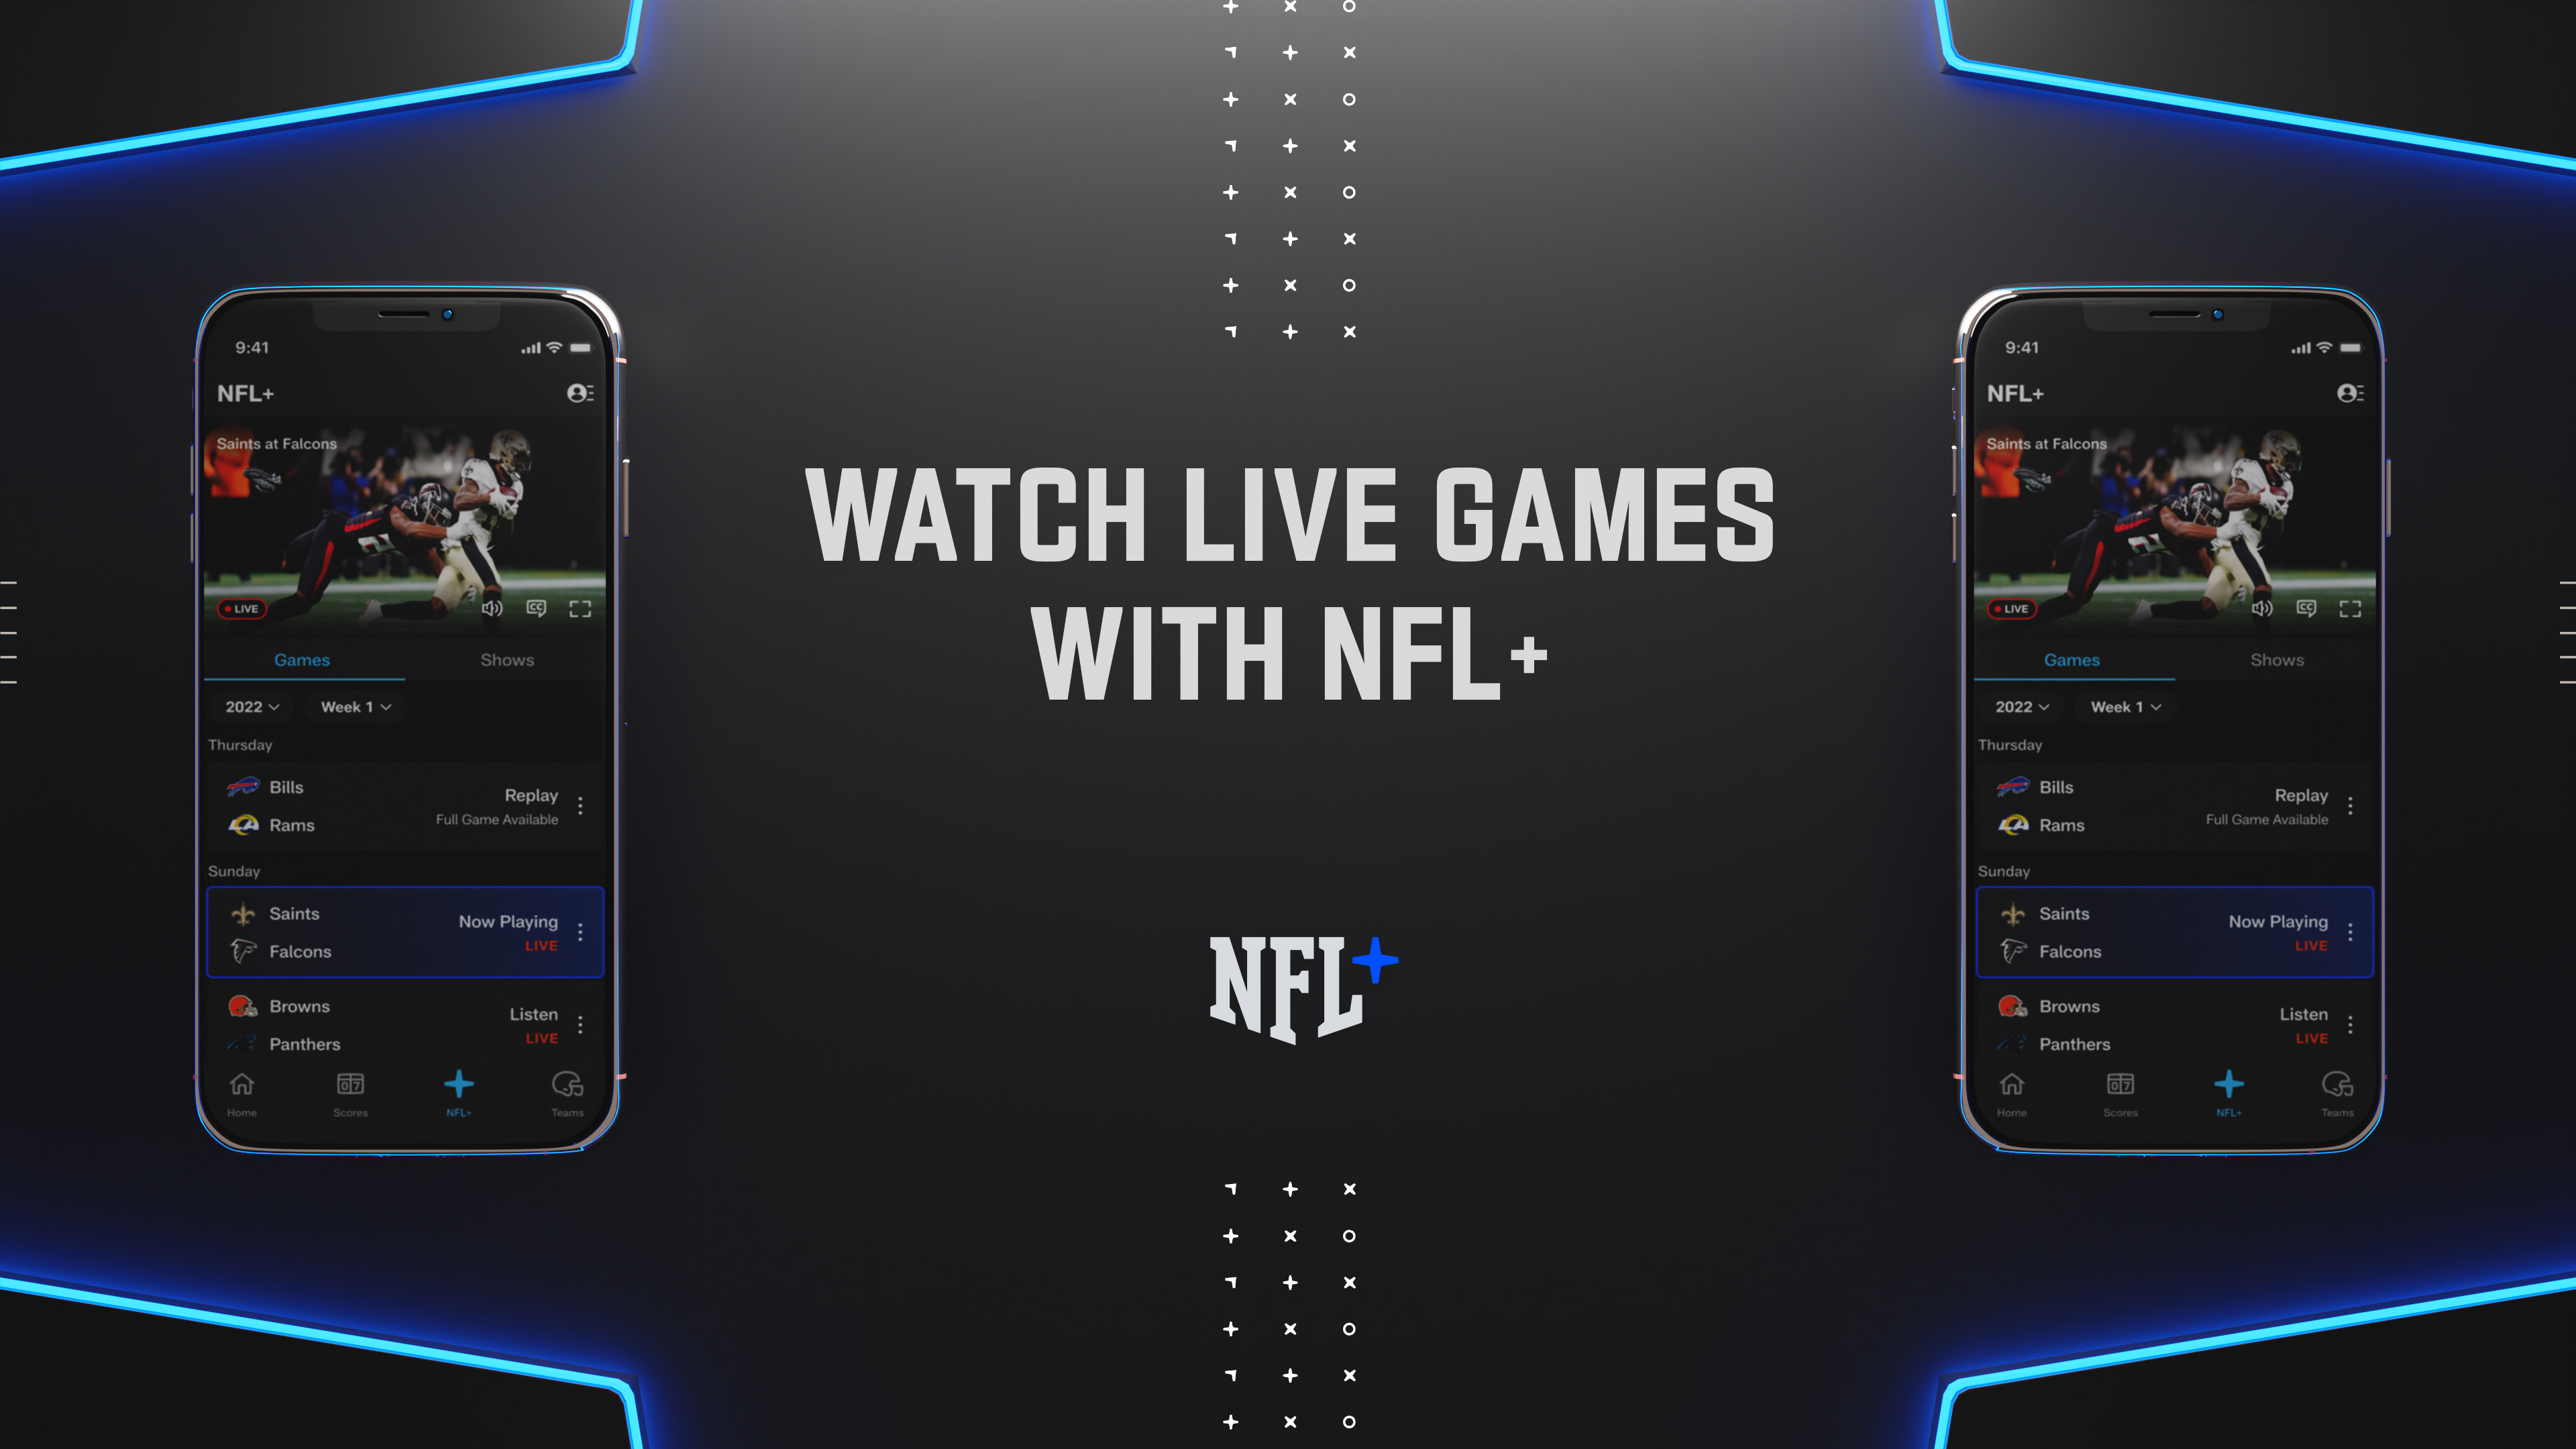 NFL Streaming Service Price, Plans, Devices, Games